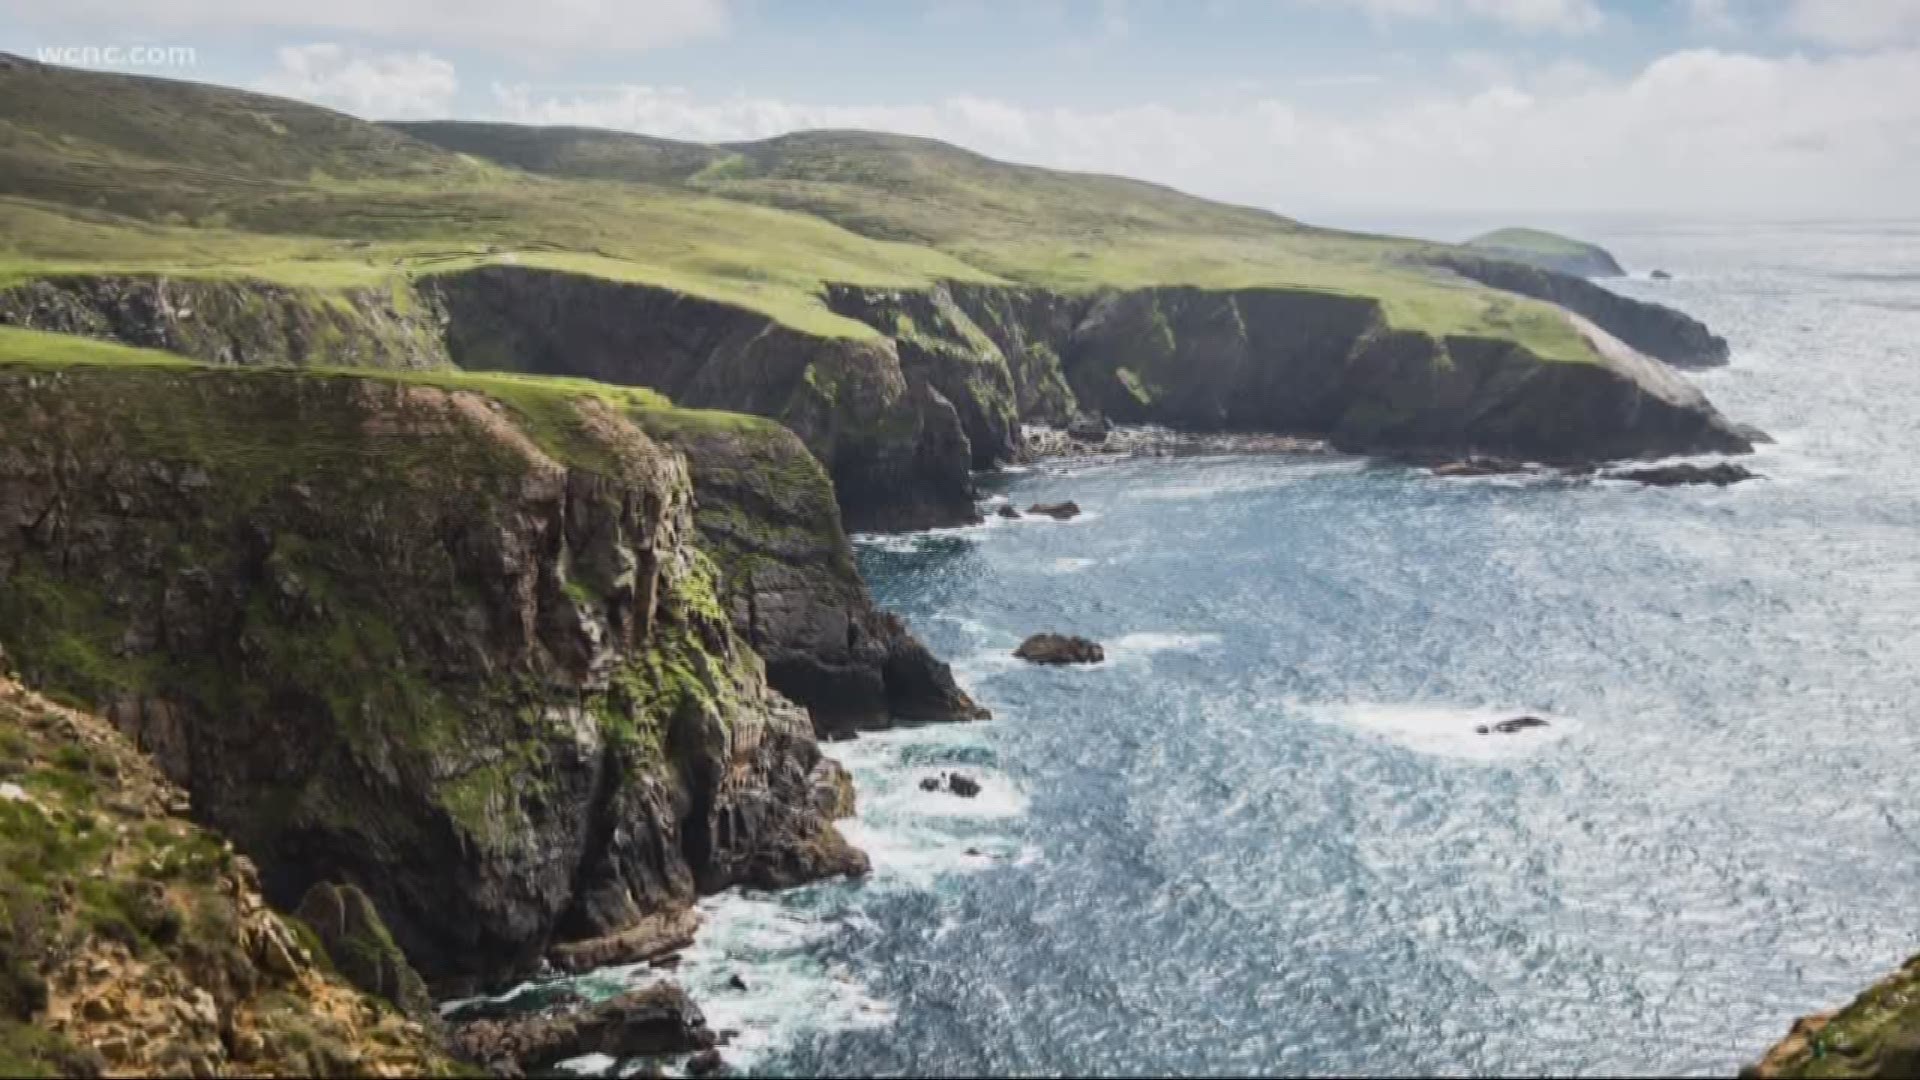 If you're considering a move across the sea, you may want to consider Arranmore, a tiny island off the coast of Ireland. With fewer than 500 residents, officials are writing letters to people around the world to give the Arranmore a shot.